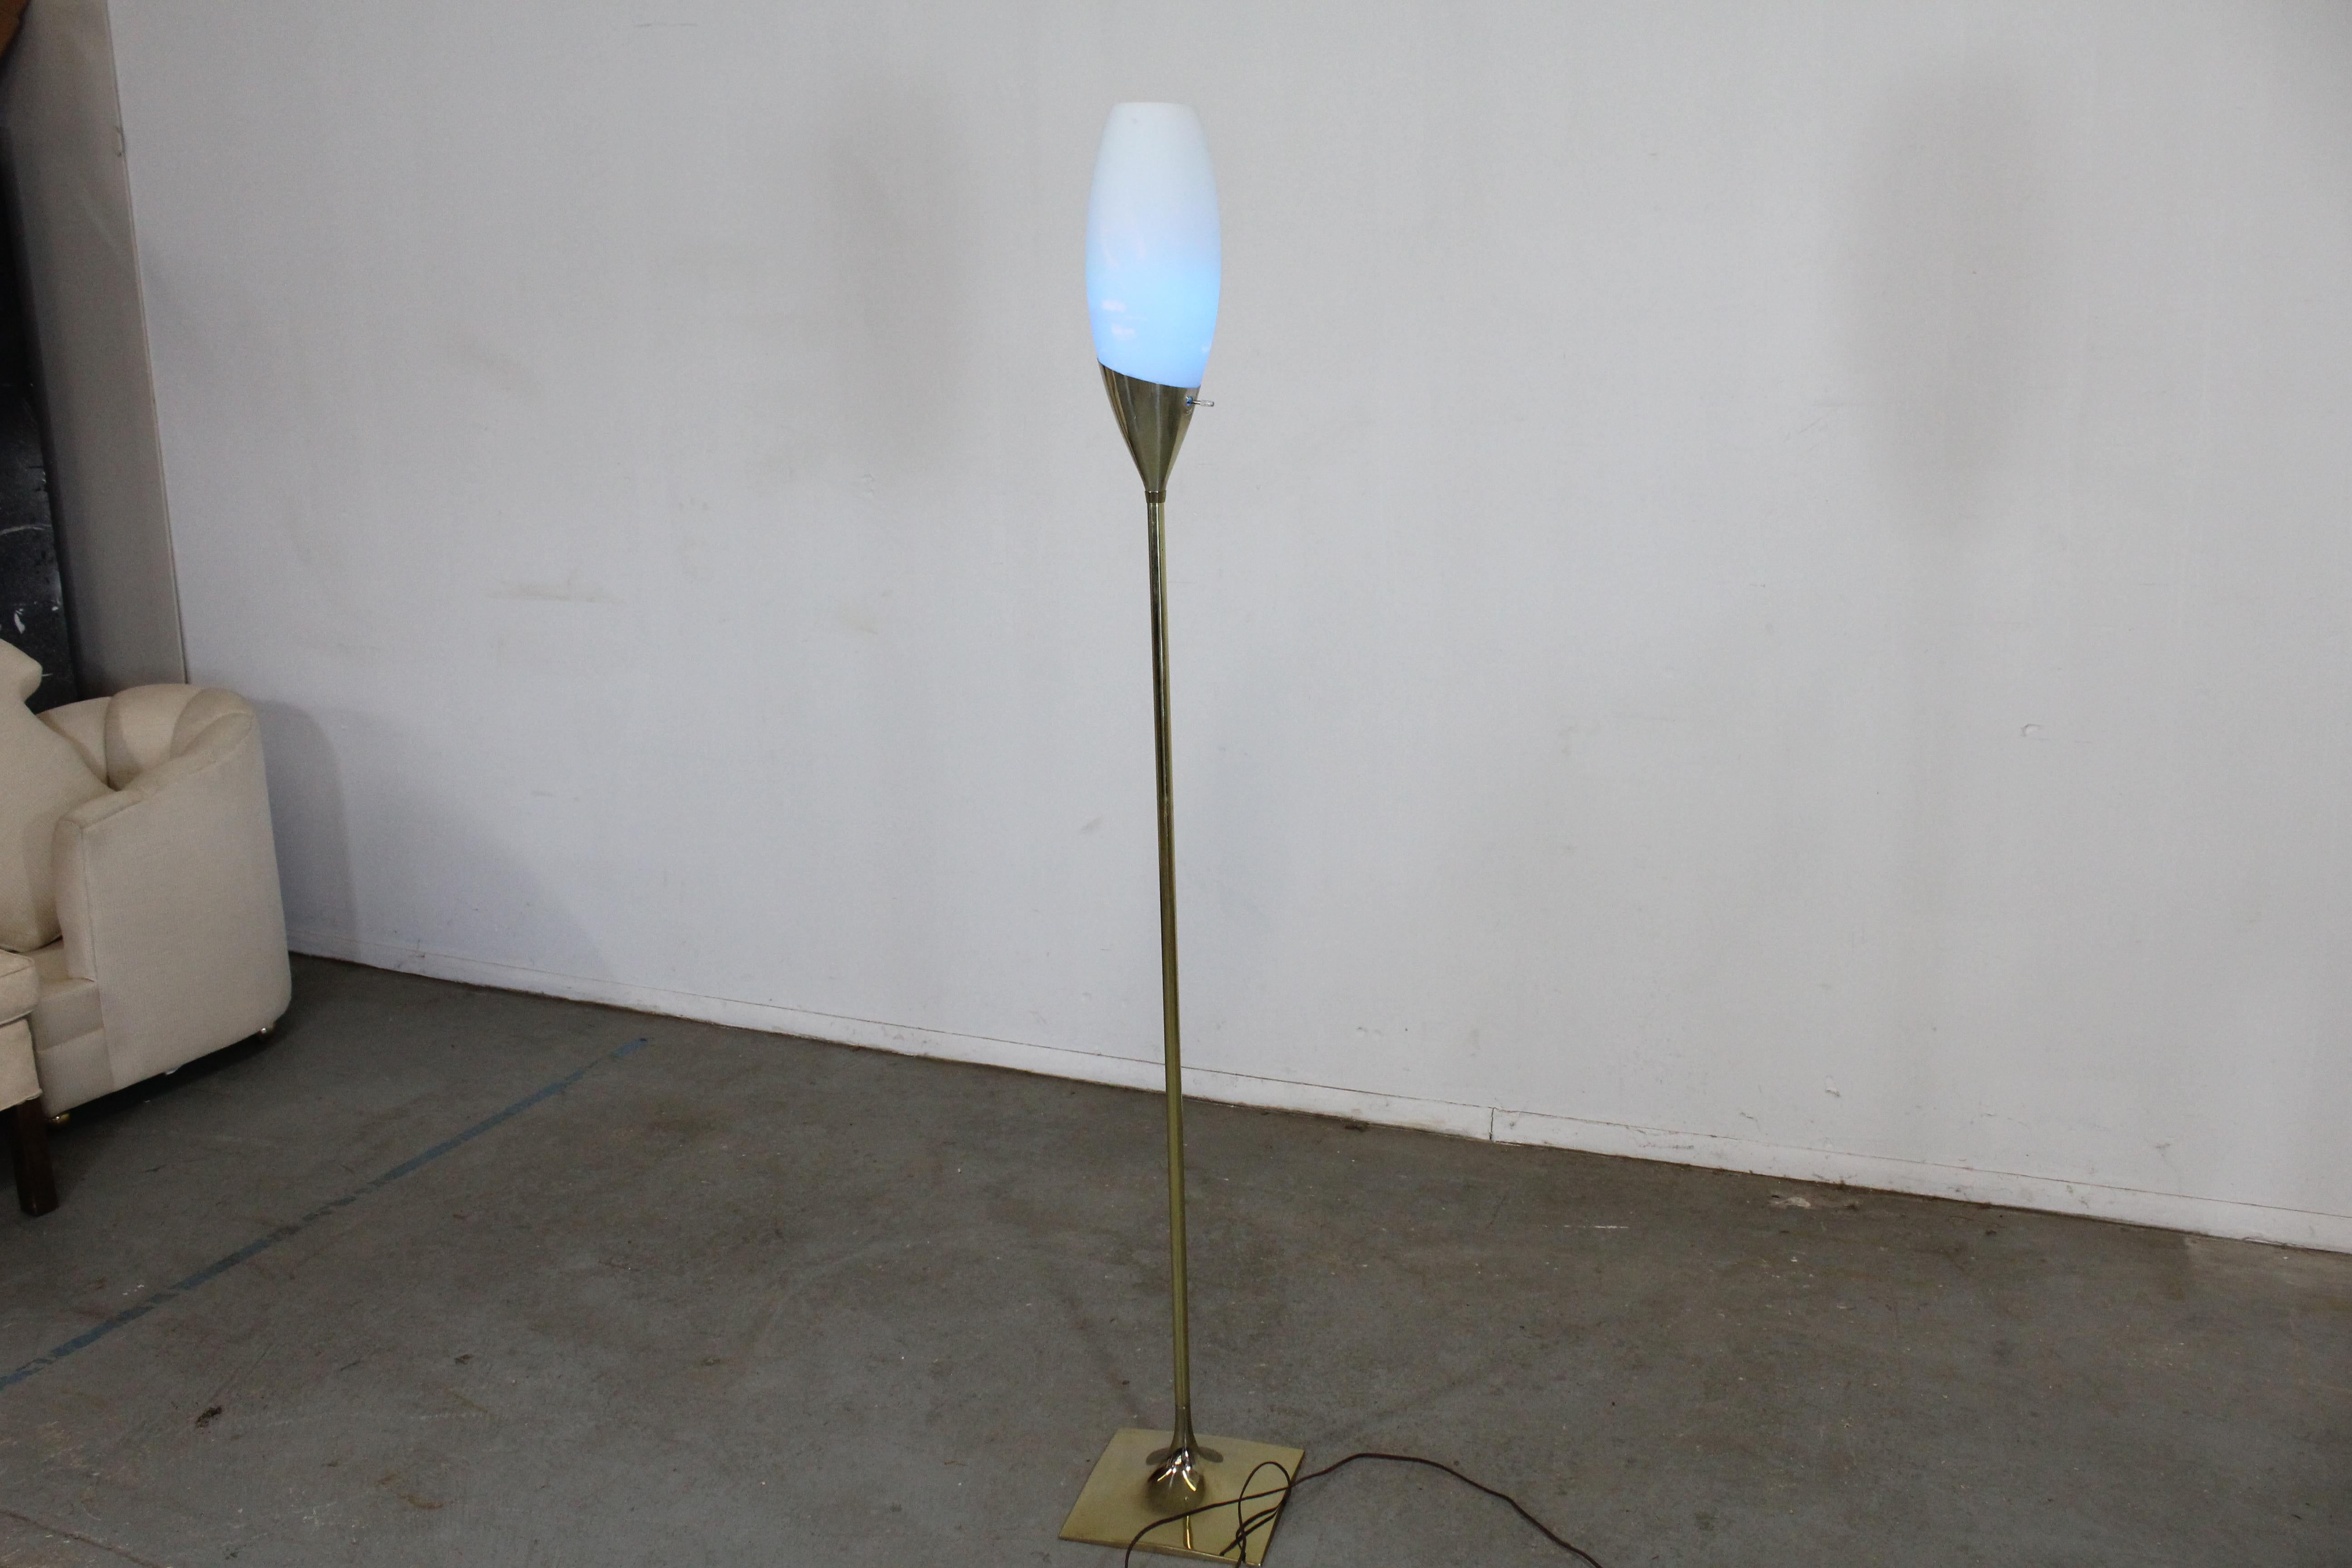 Mid-Century Modern Gerald Thurston Tulip floor lamp.

Offered is a beautiful Mid-Century Modern vintage floor lamp. The lamp is made of brass. It is in good vintage condition, has been tested and works. The blue bulb has damage on its filaments